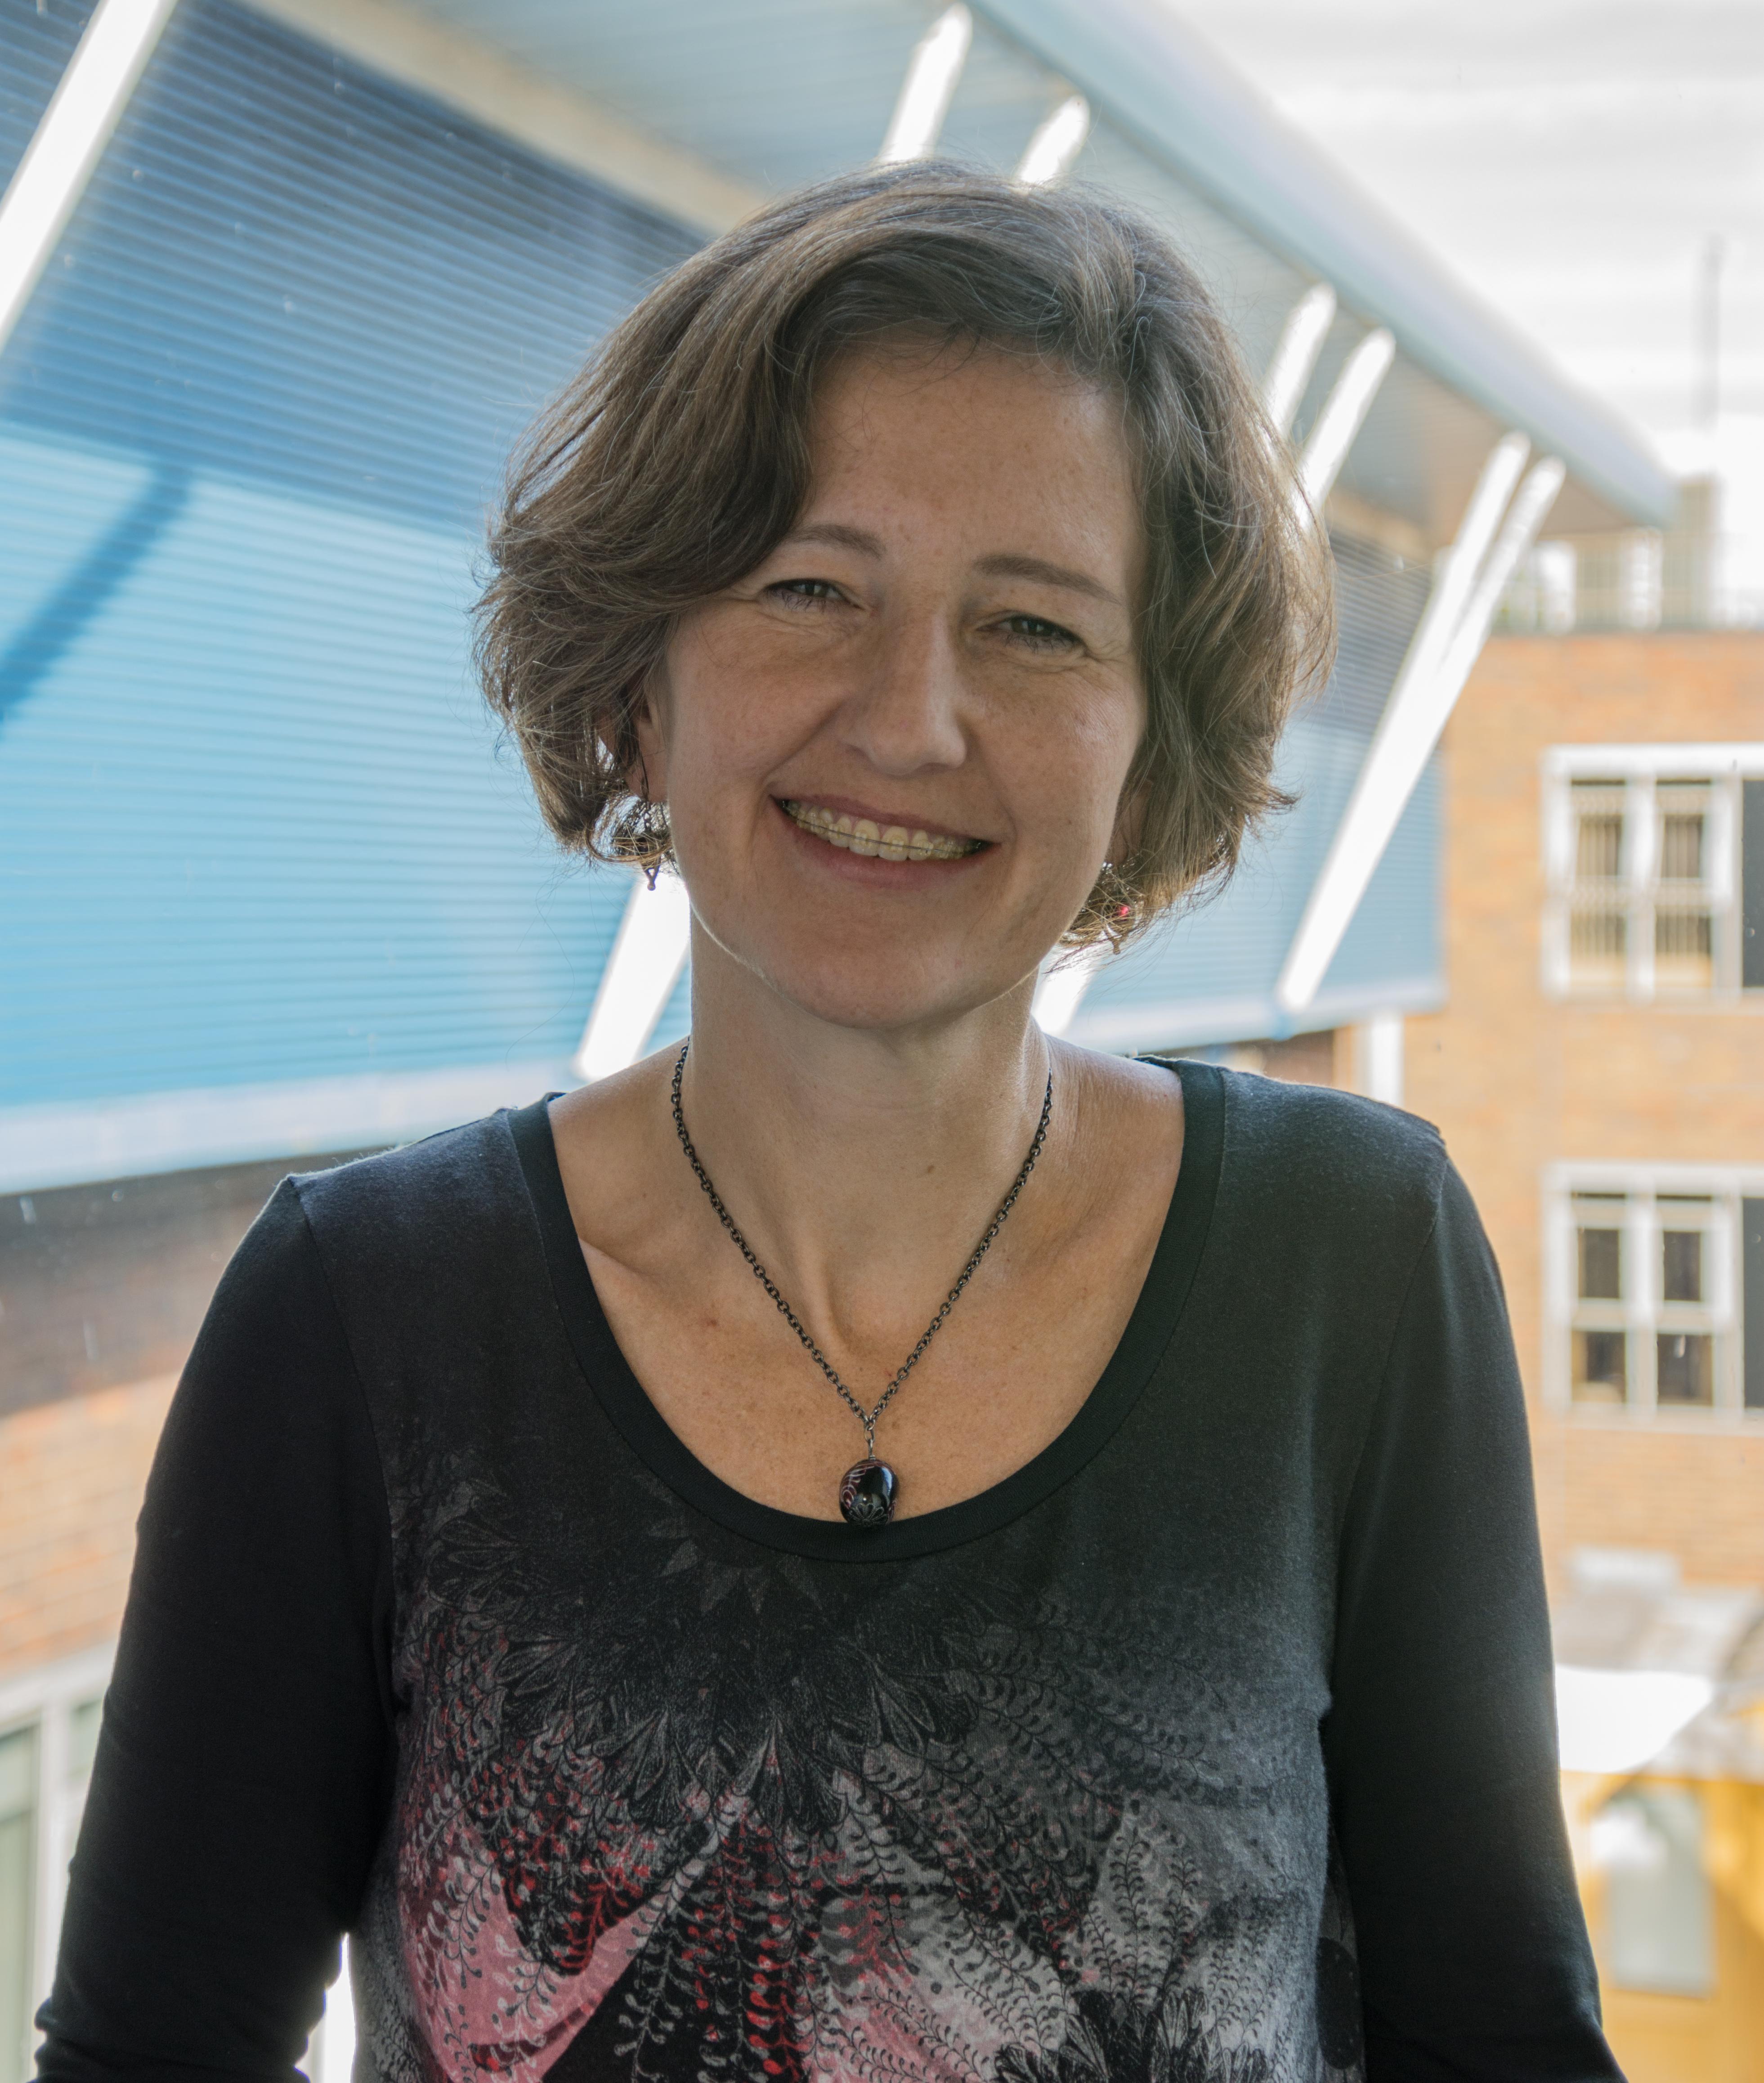 Blog: Guest Blog on Sustainable Buildings by Dr Alice Moncaster